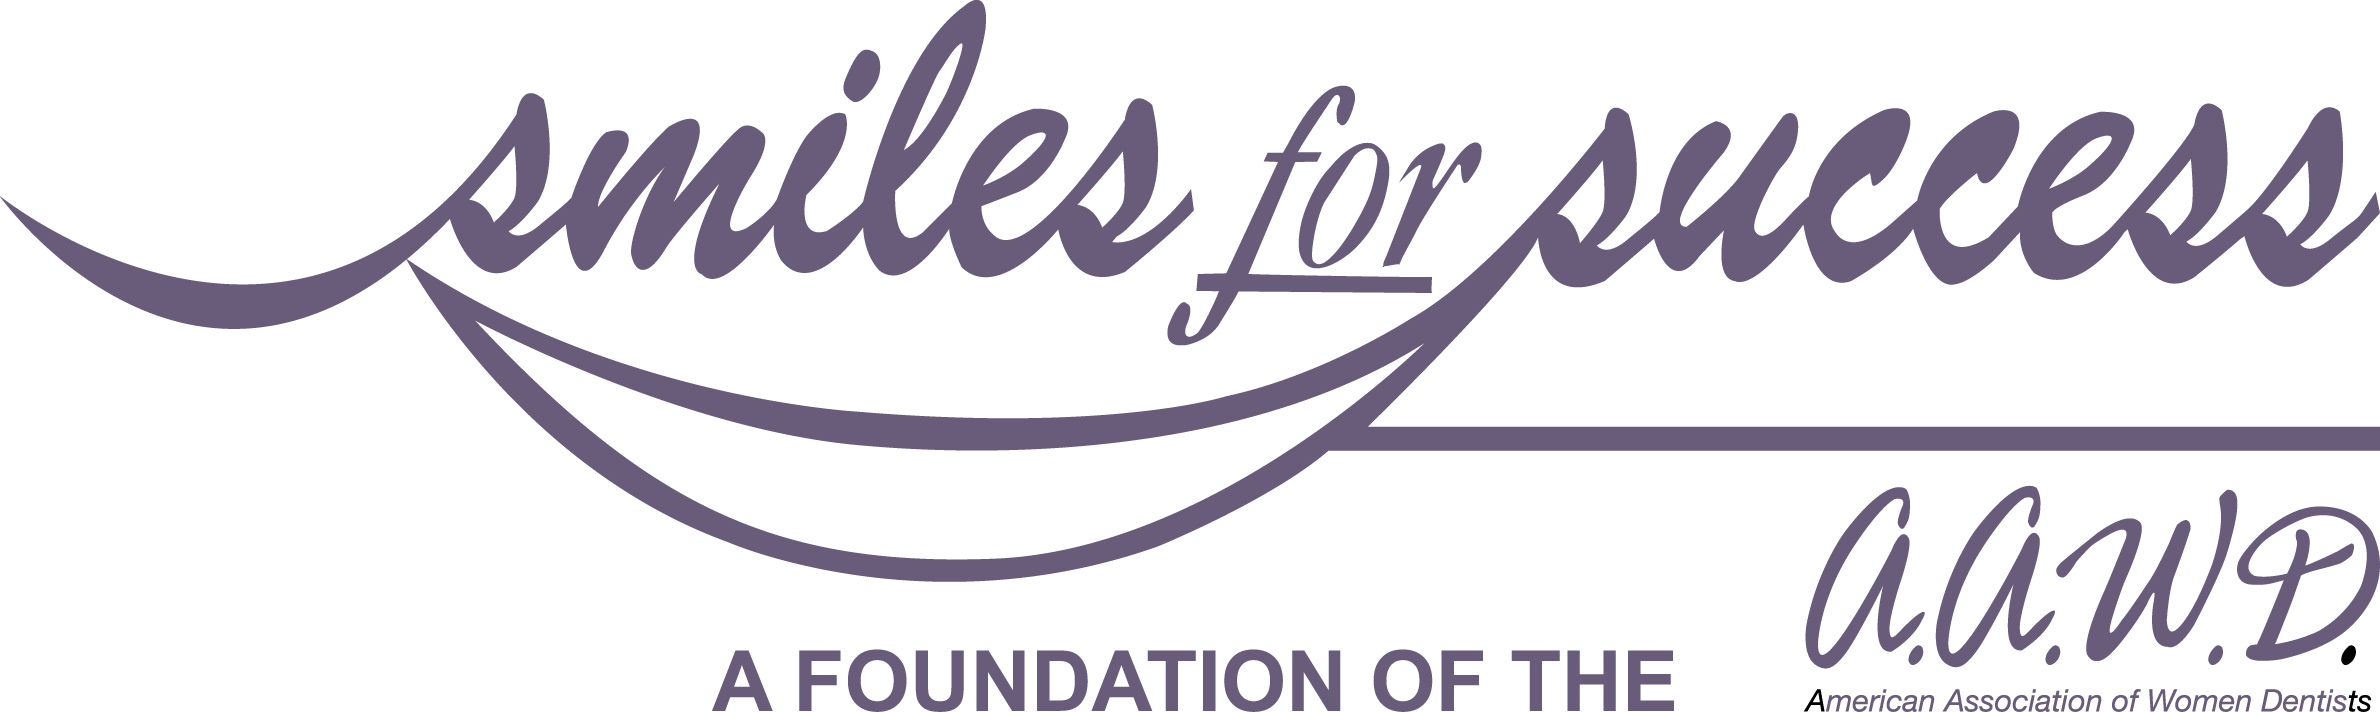 The Smiles For Success Foundation